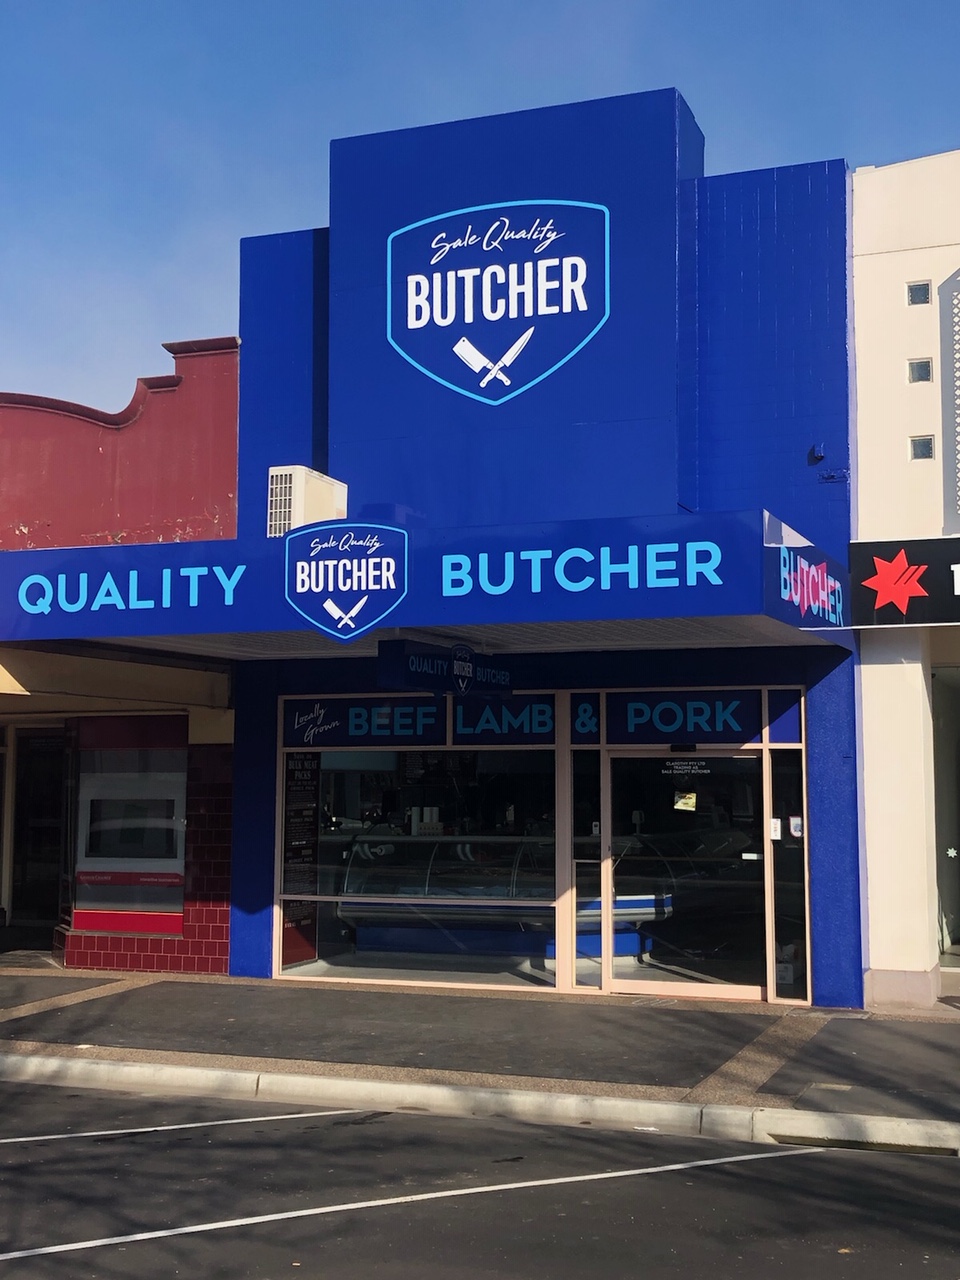 The Sign Shop Aust | store | 55 Forge Creek Rd, Bairnsdale VIC 3875, Australia | 0351530429 OR +61 3 5153 0429